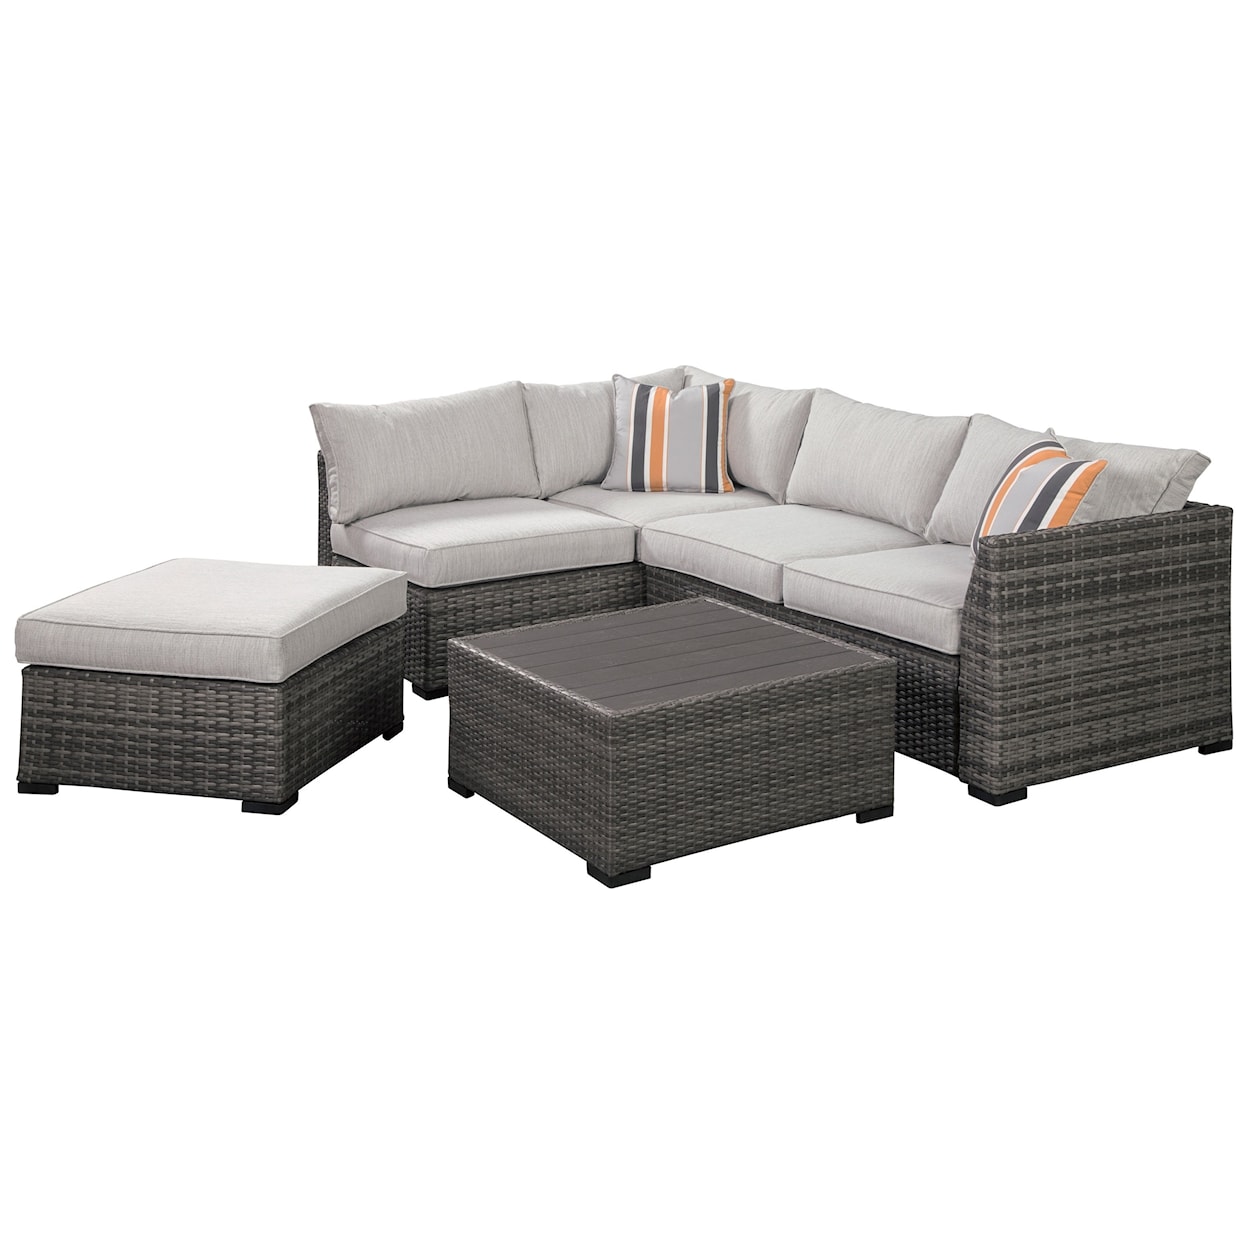 Ashley Furniture Signature Design Cherry Point Outdoor Sectional Set